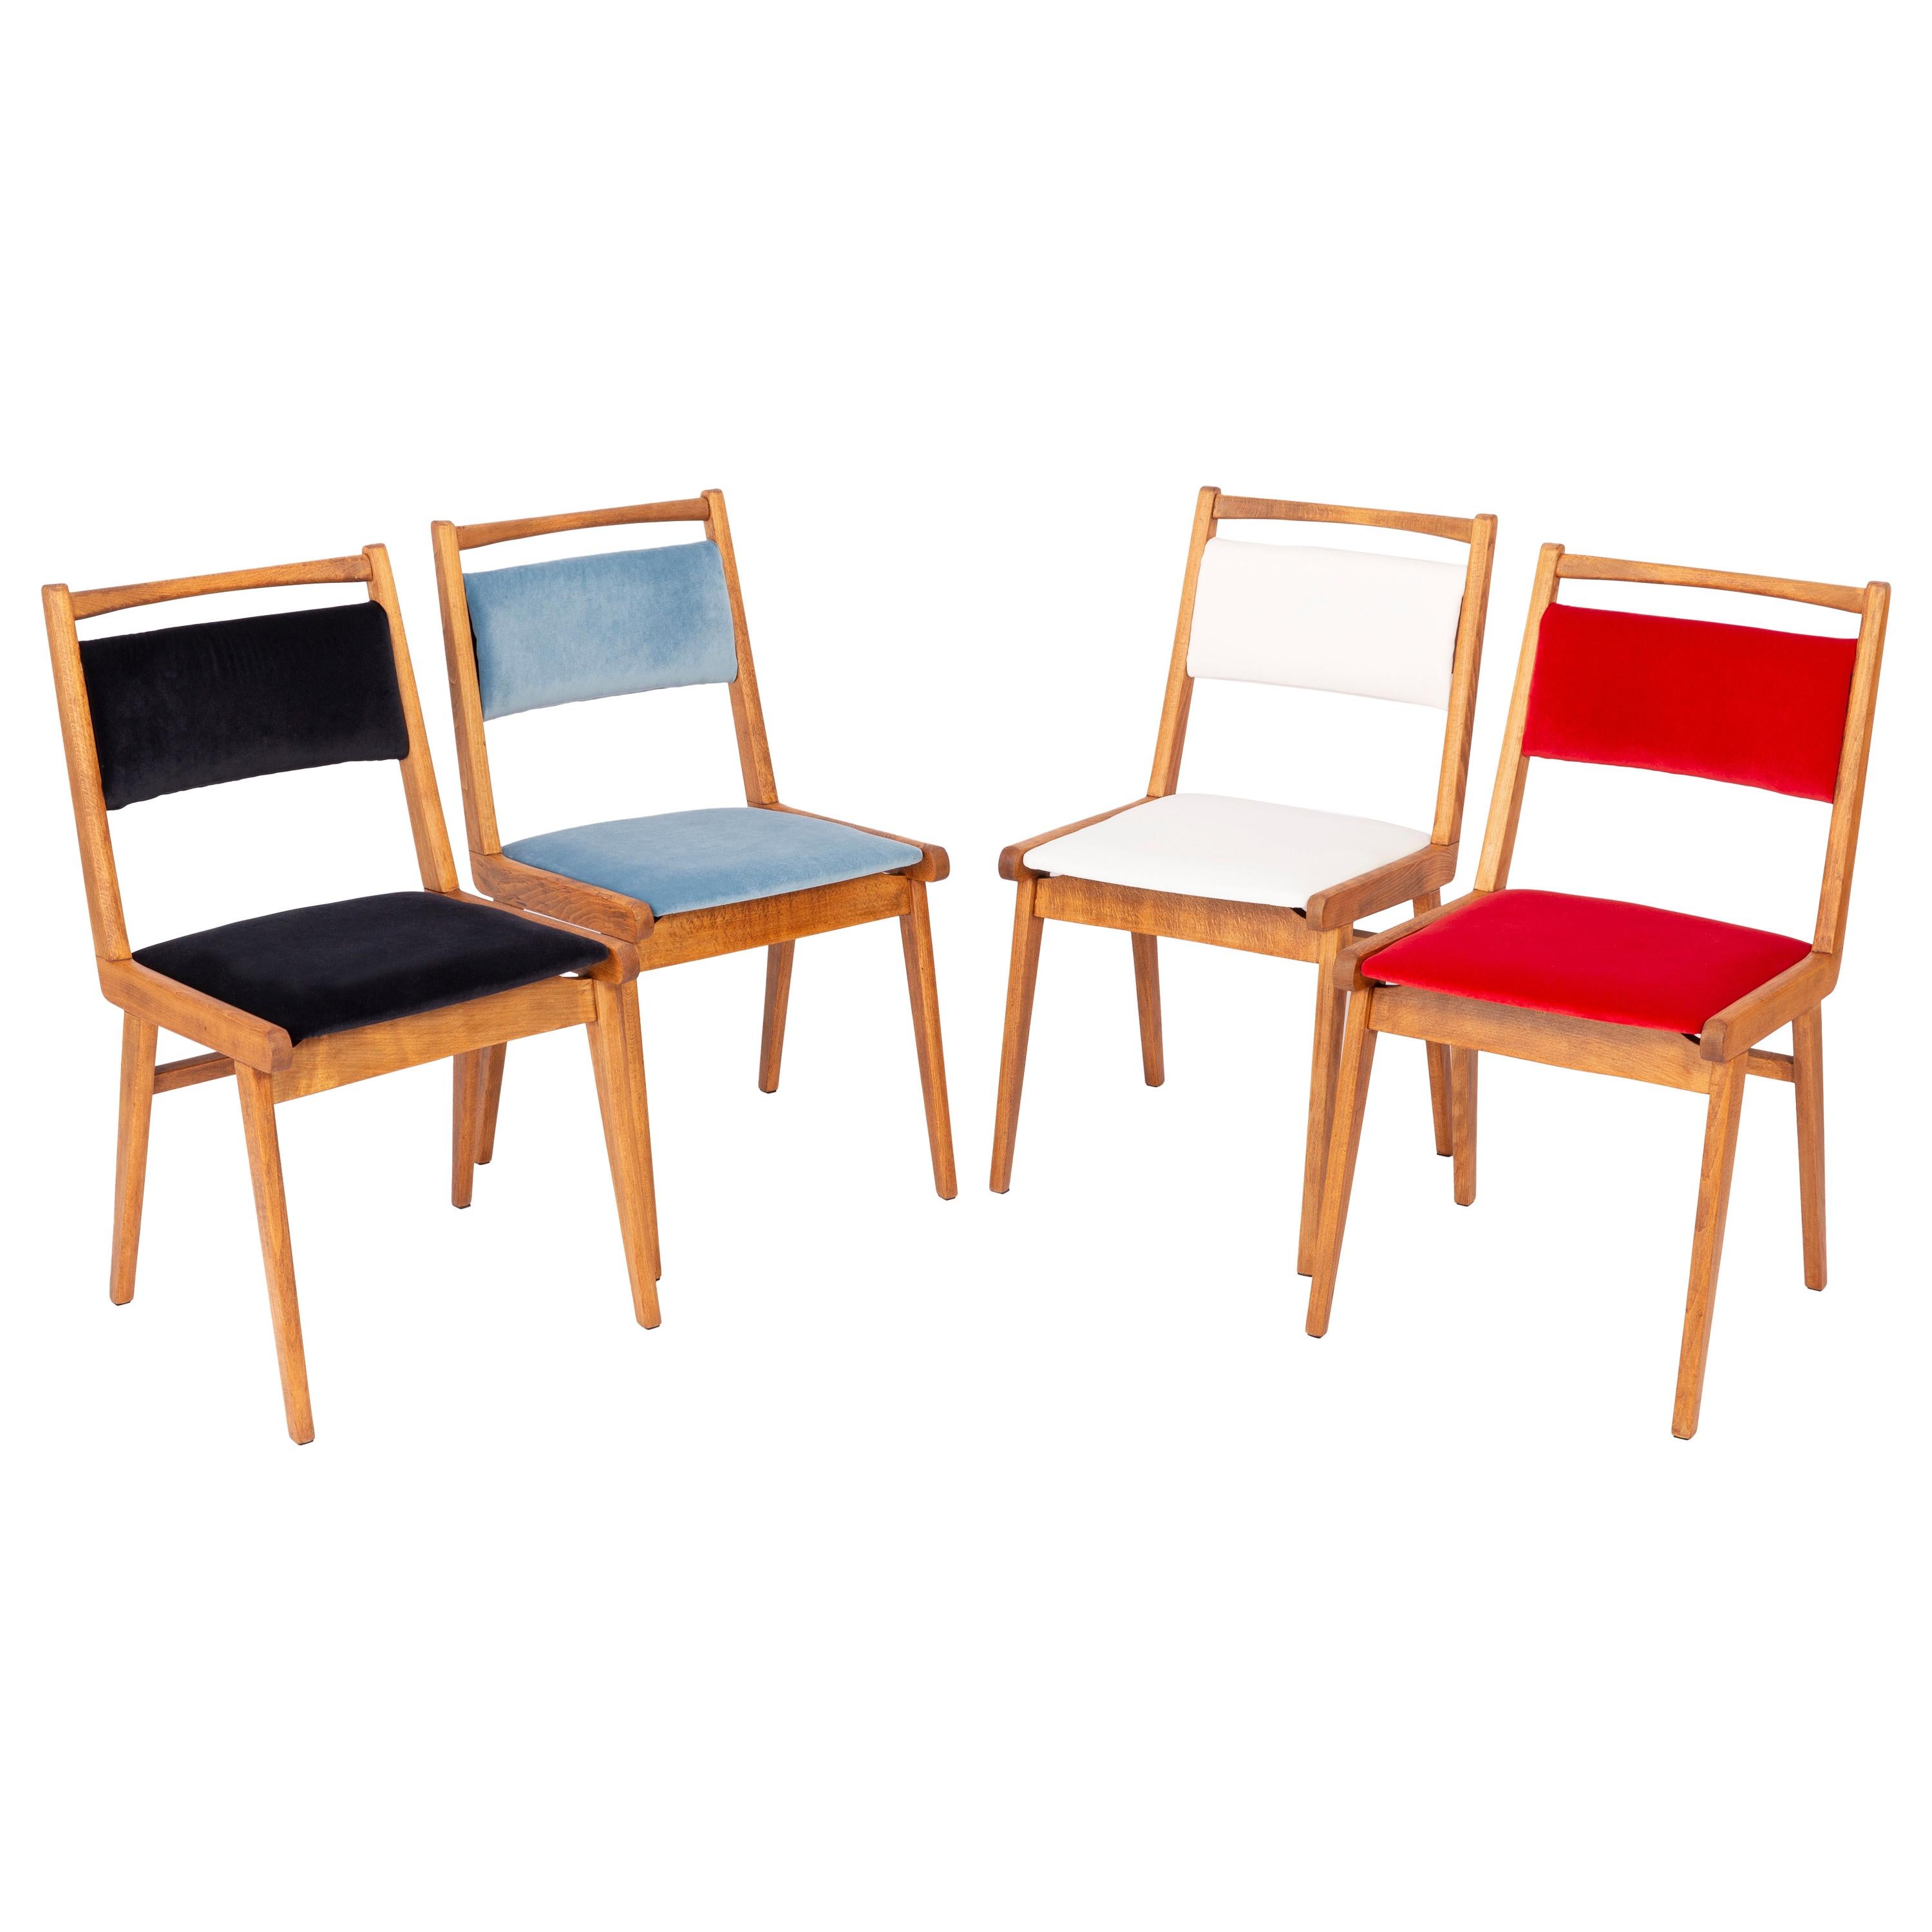 Set of Four 20th Century Black Blue White and Red Velvet Chairs, Poland, 1960s